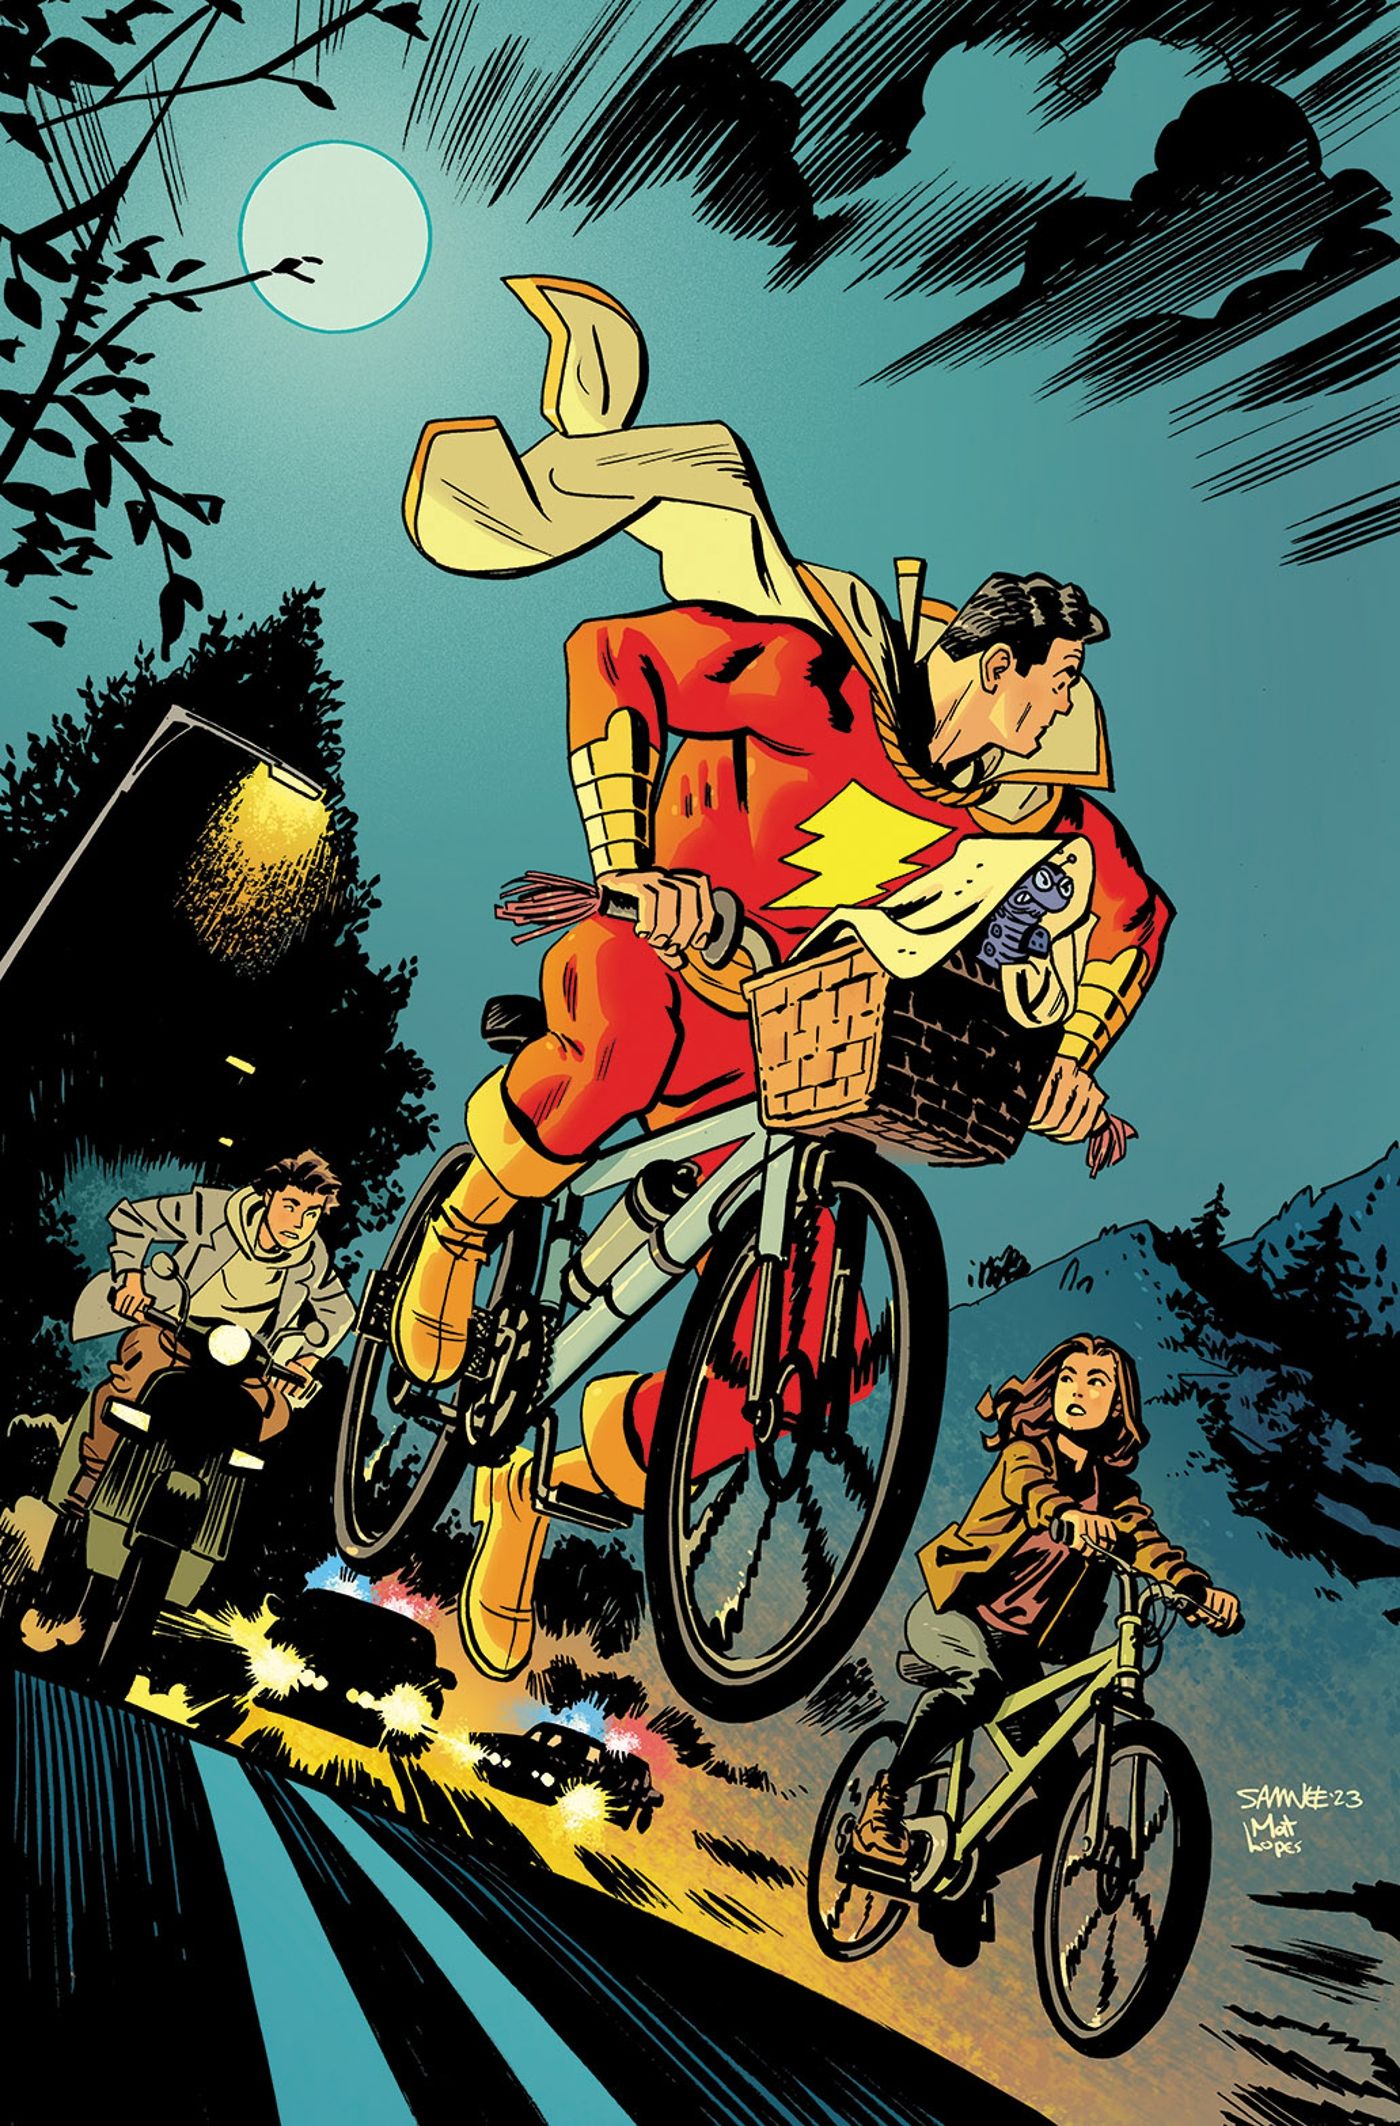 Shazam Family Meets E.T. in a Perfect Spielberg Homage Cover